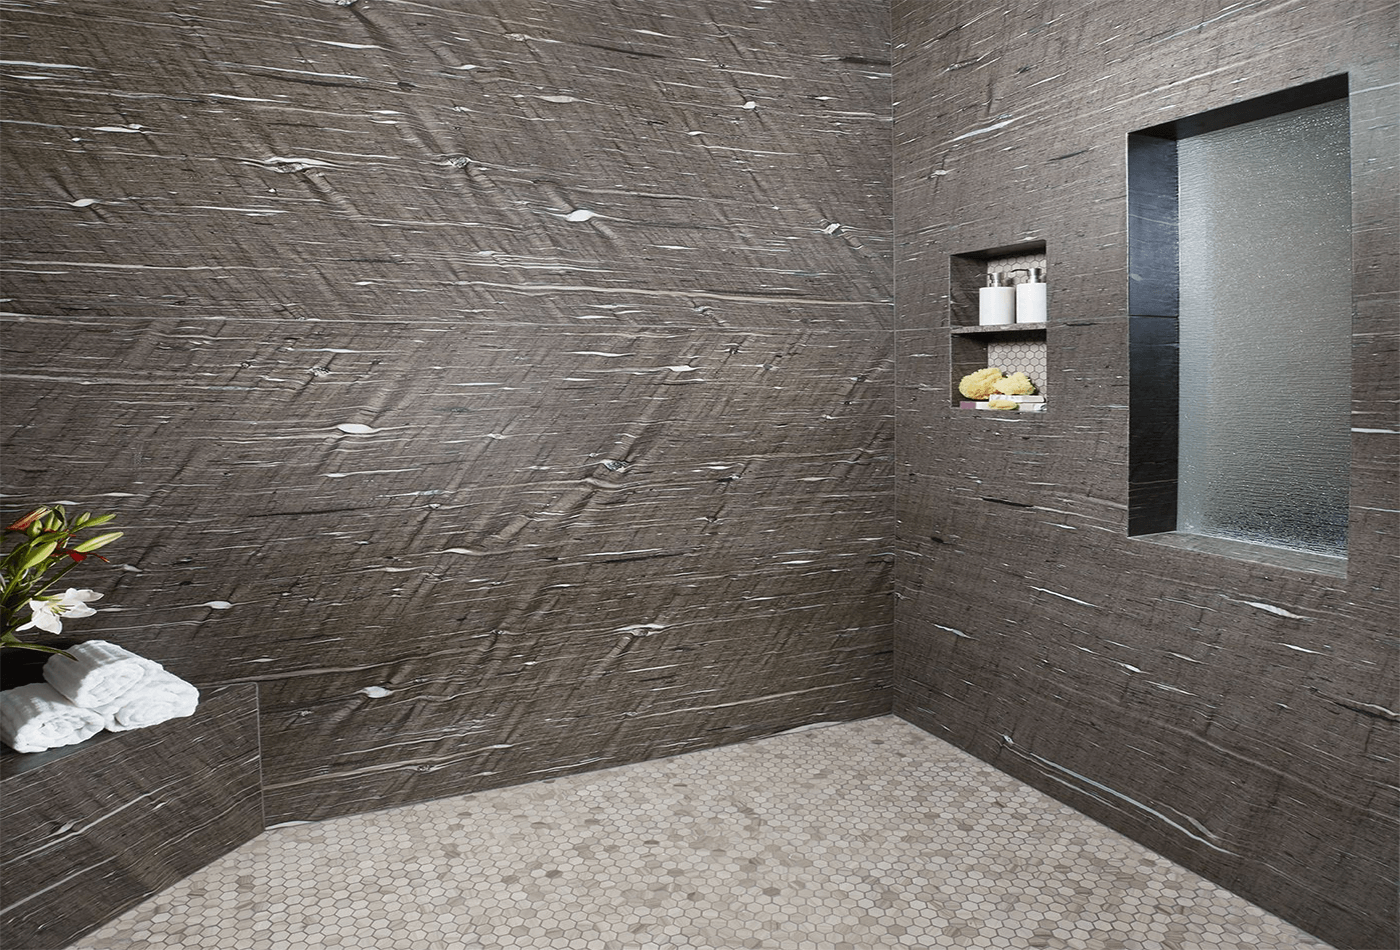 Design your office bathrooms with these Black Granite